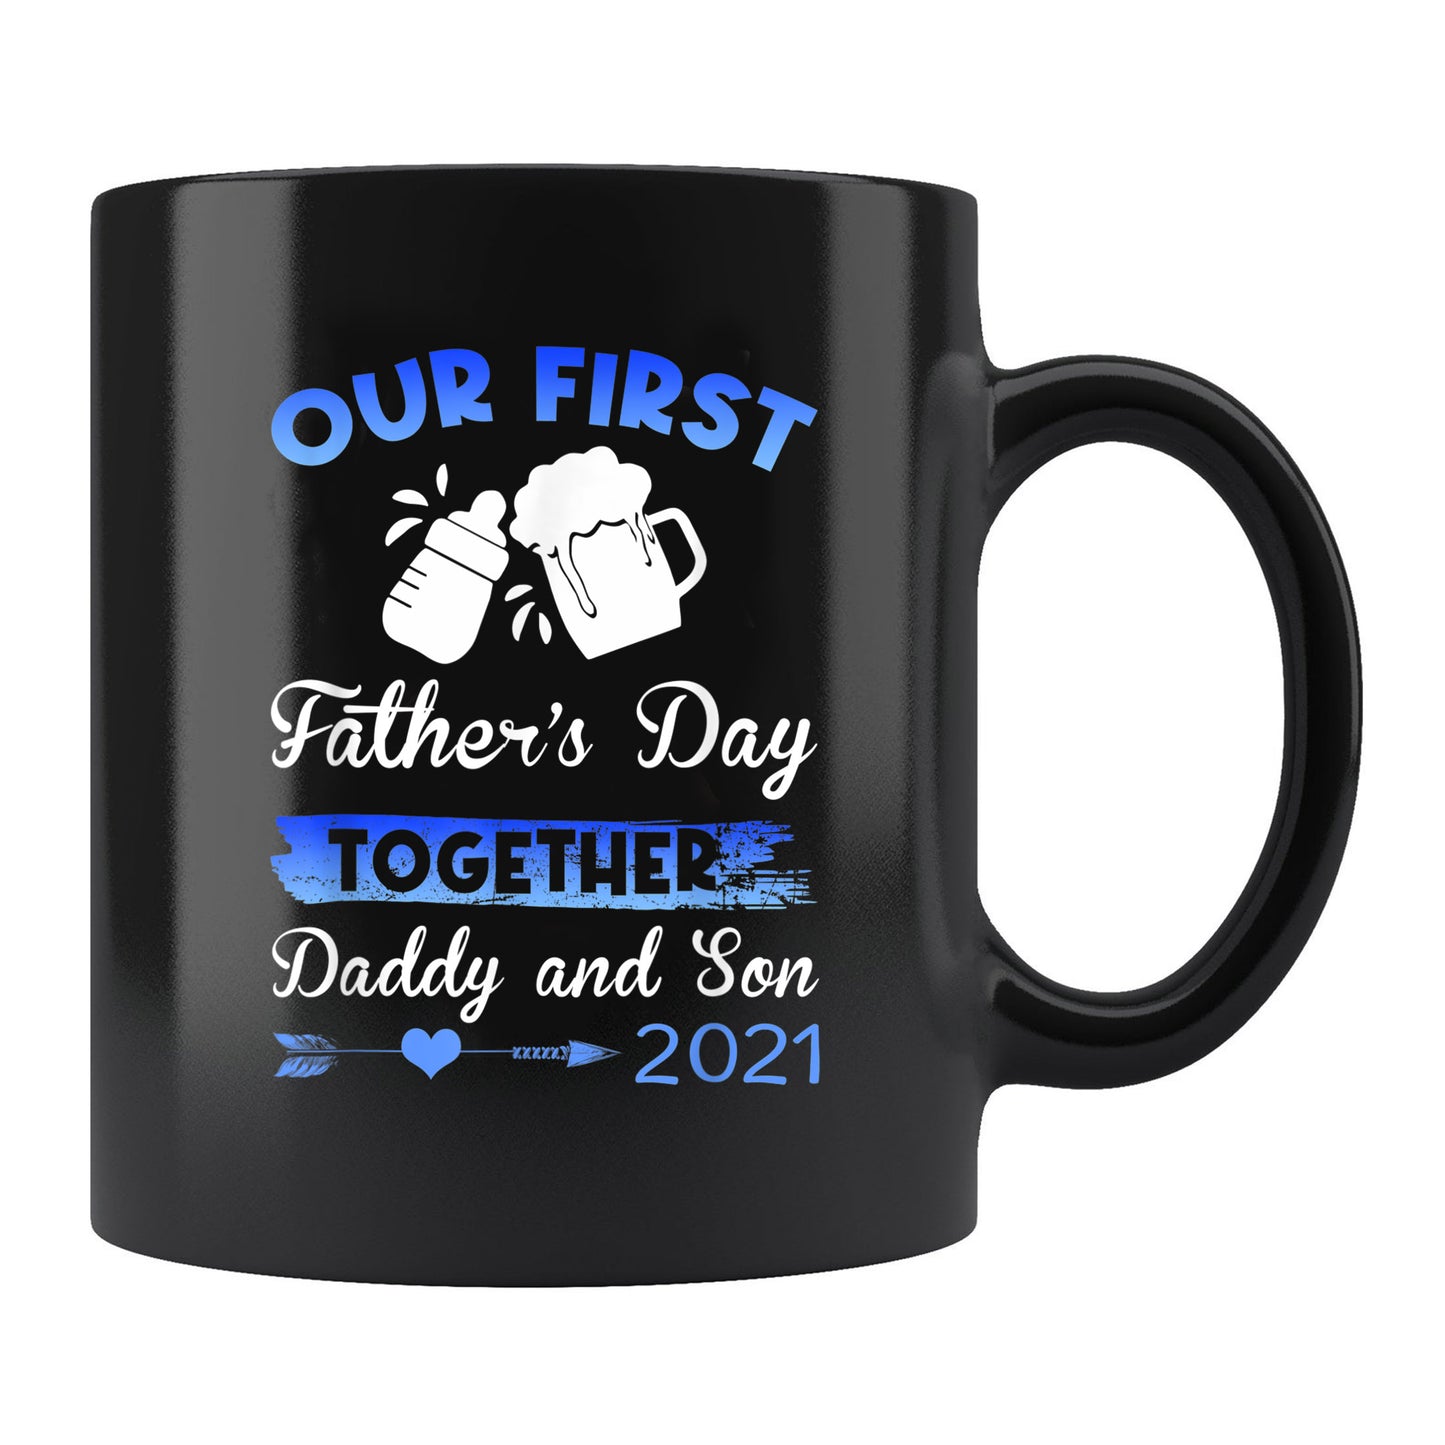 First Fathers Day Mug Our First Fathers Day Together 1St Fathers Day Mug , 11oz or 15oz, Happy Fathers Day Gift Ideas For Dad